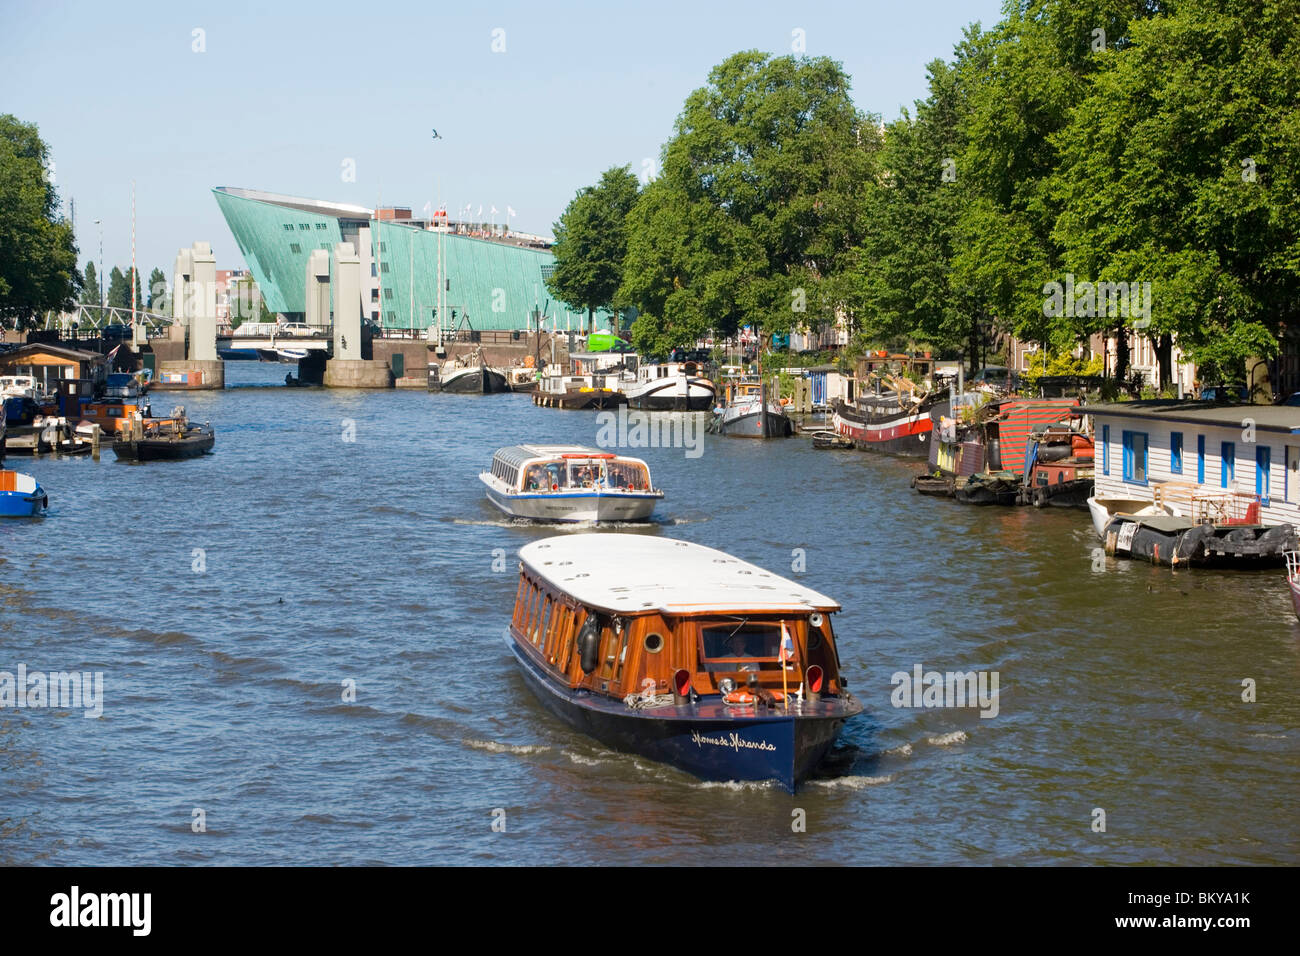 NEMO Museum, Oude Schans, Boats, View over Oude Schans with excursion boats to NEMO Museum, Amsterdam, Holland, Netherlands Stock Photo